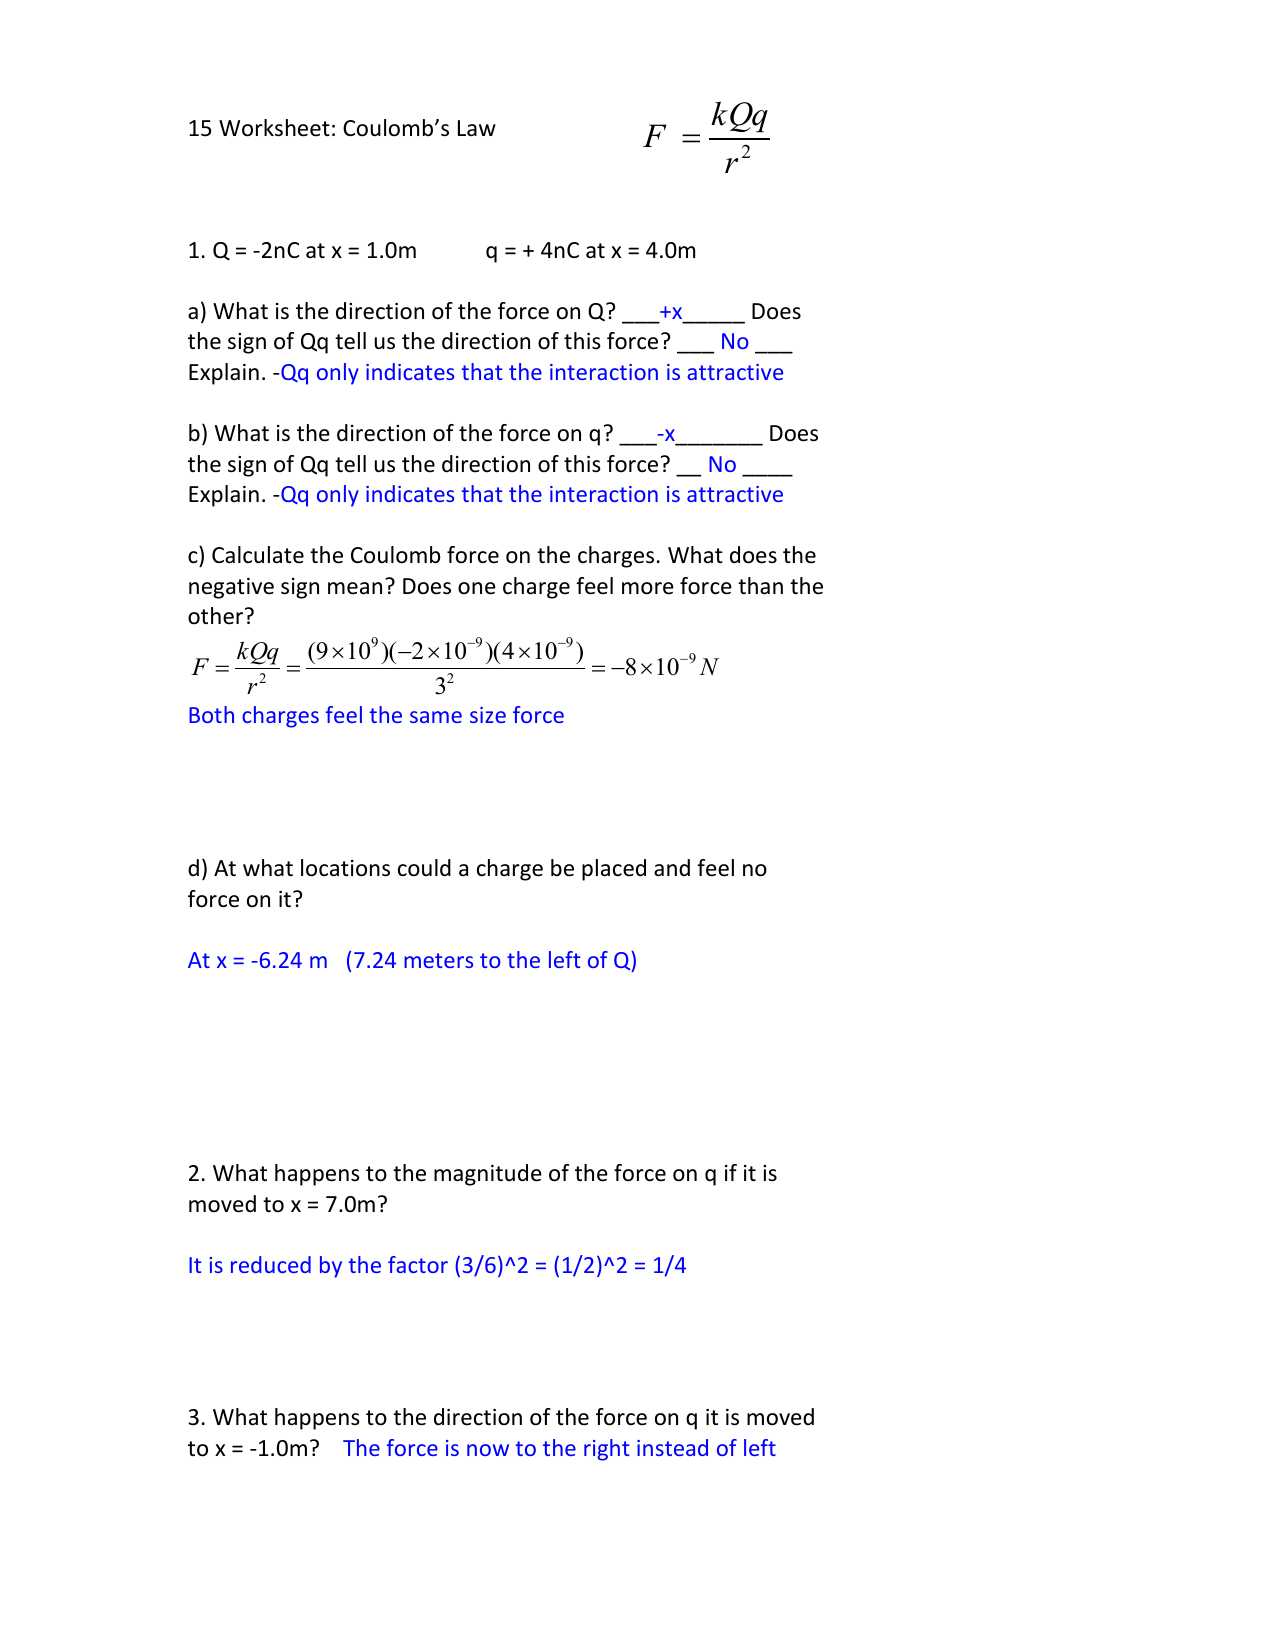 coulomb-s-law-worksheet-answers-handmadeced